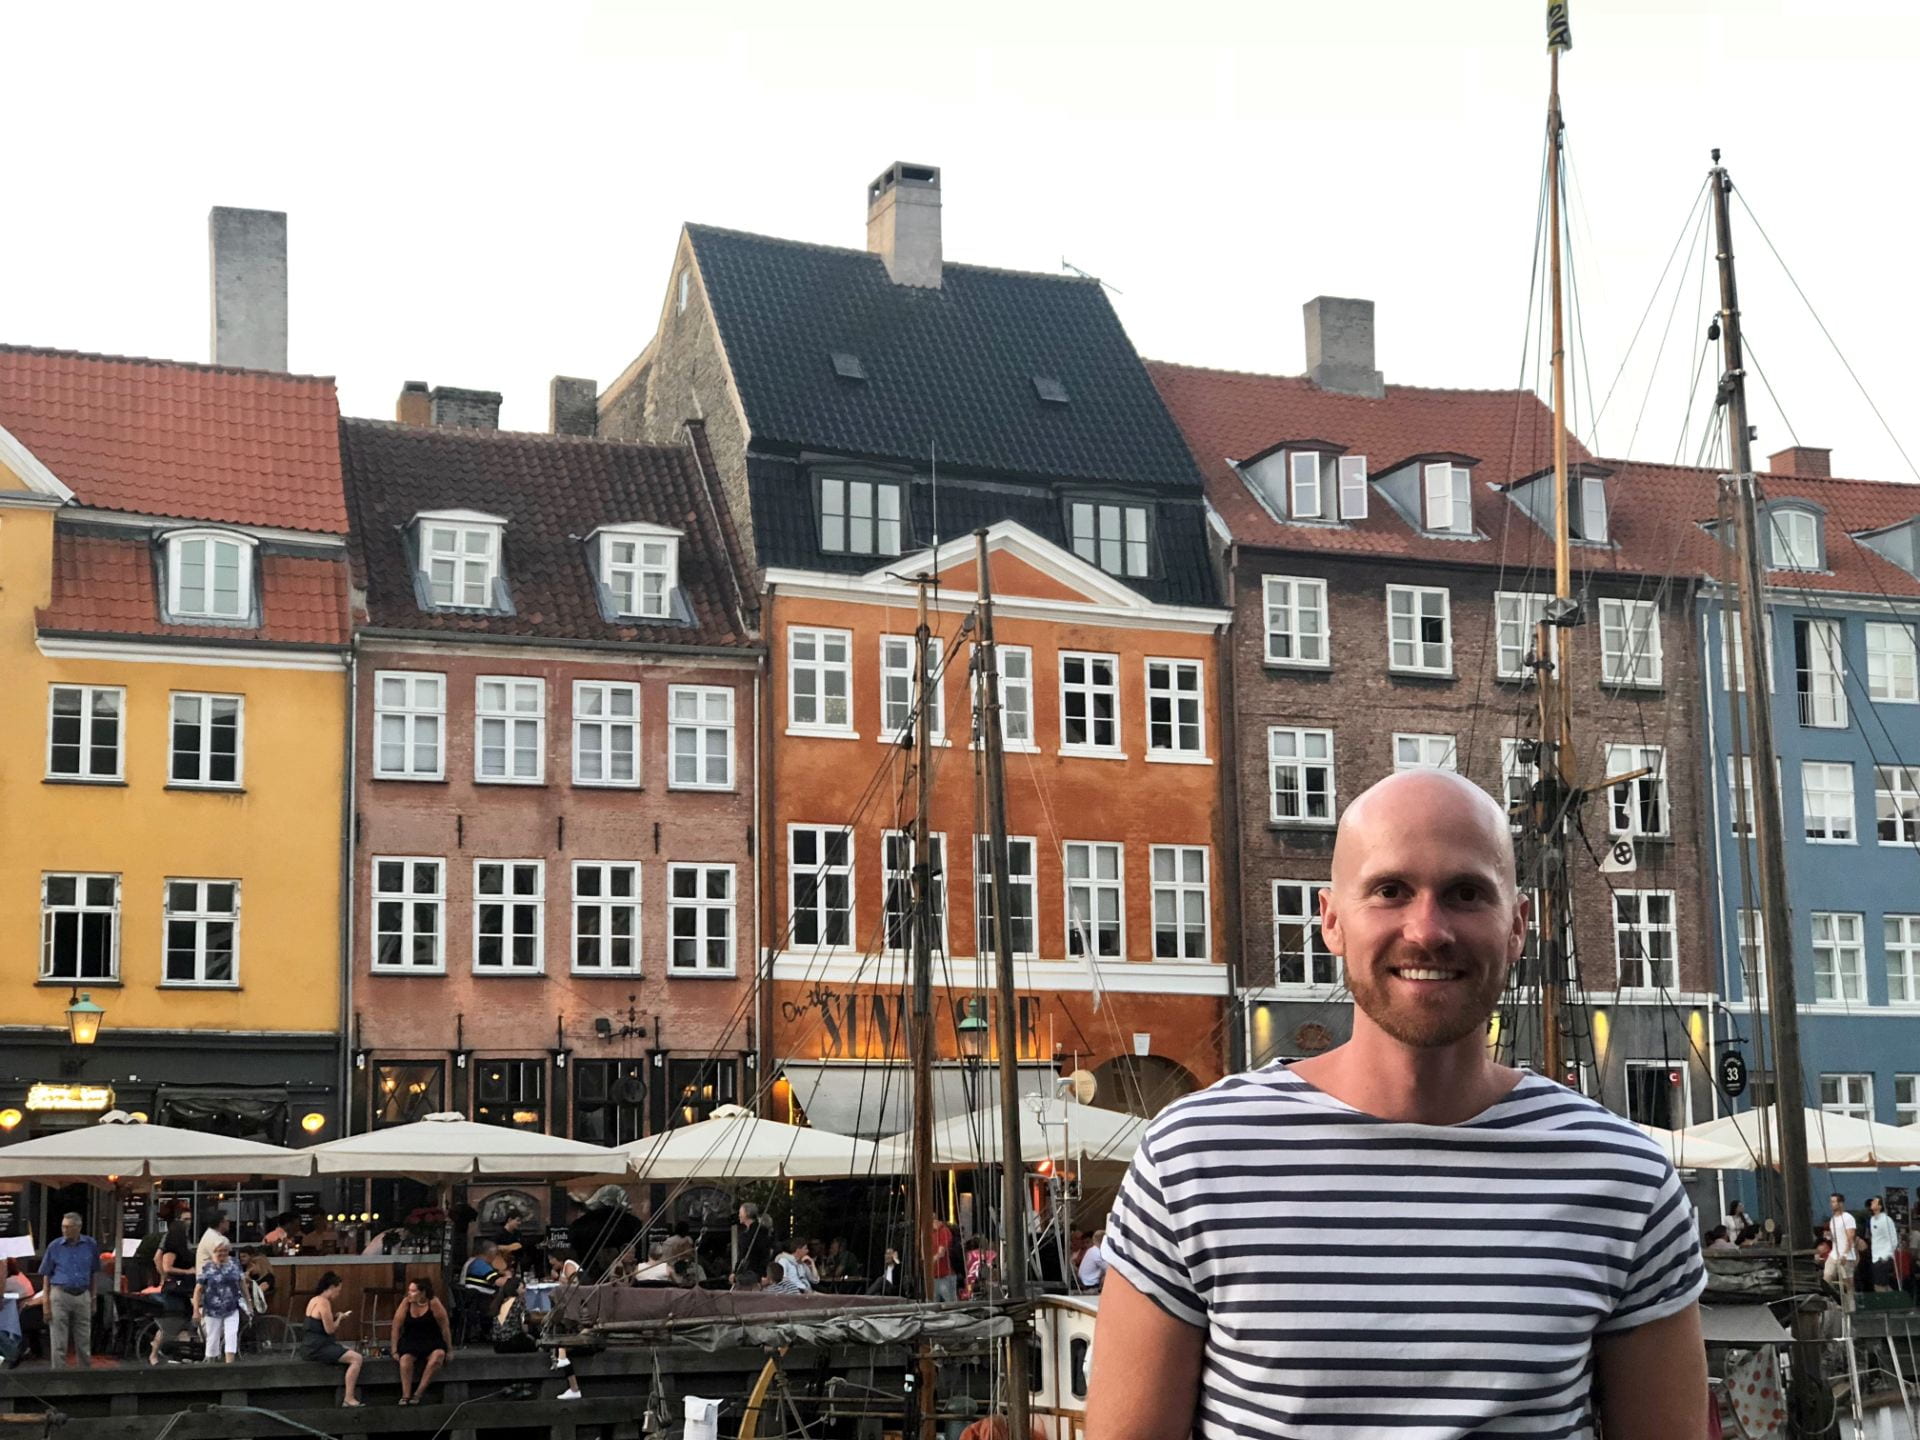 Jason Sprinkle stands in front of colorful houses in Denmark